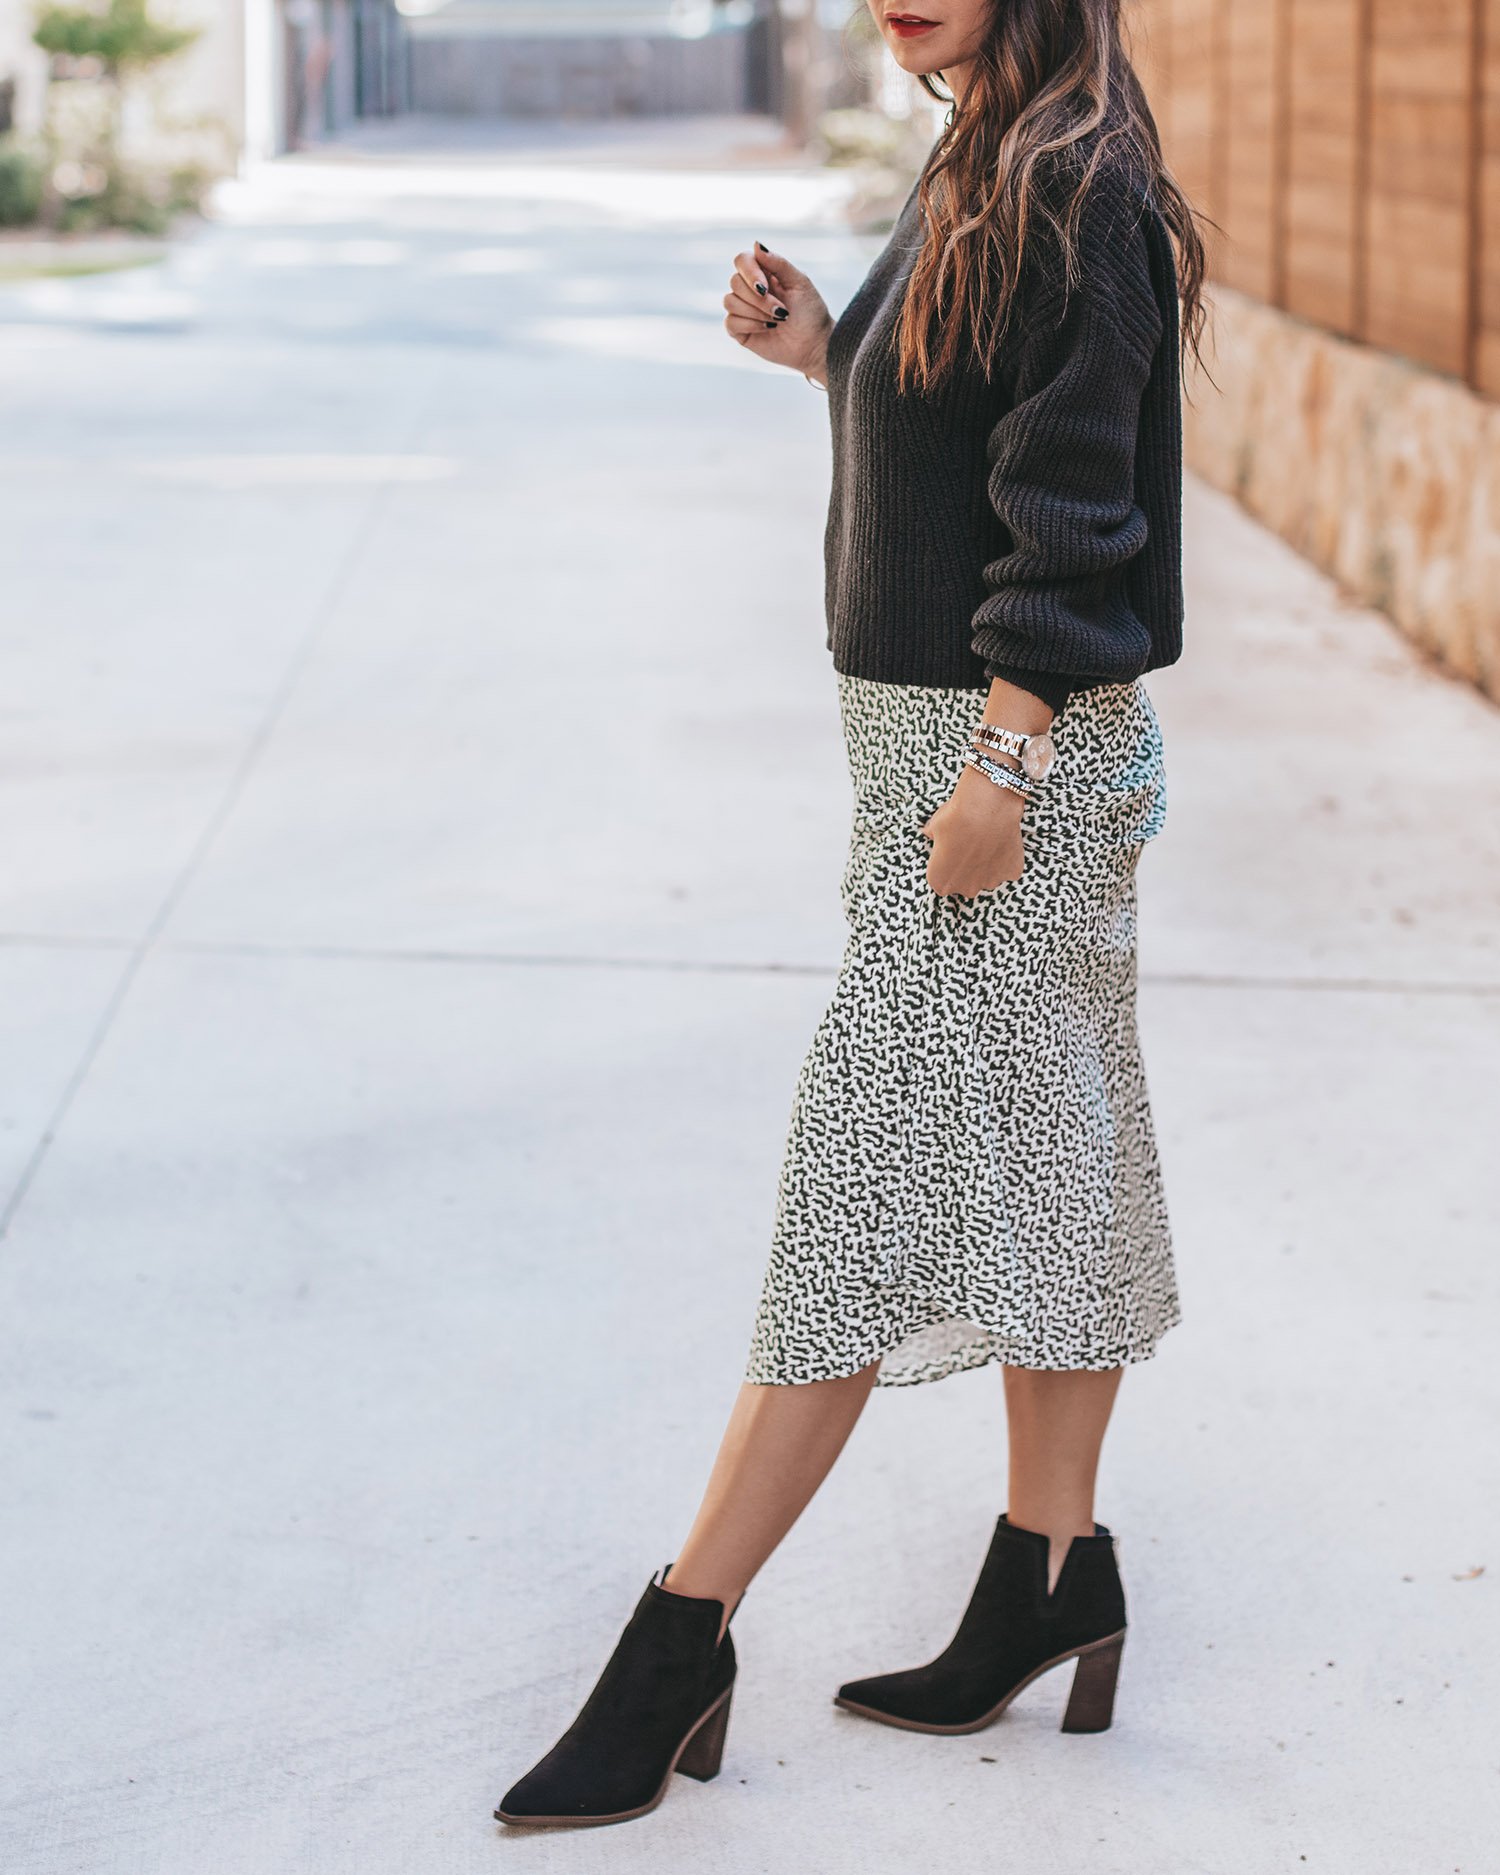 Cute Fall Skirt Outfit with Ankle Boots